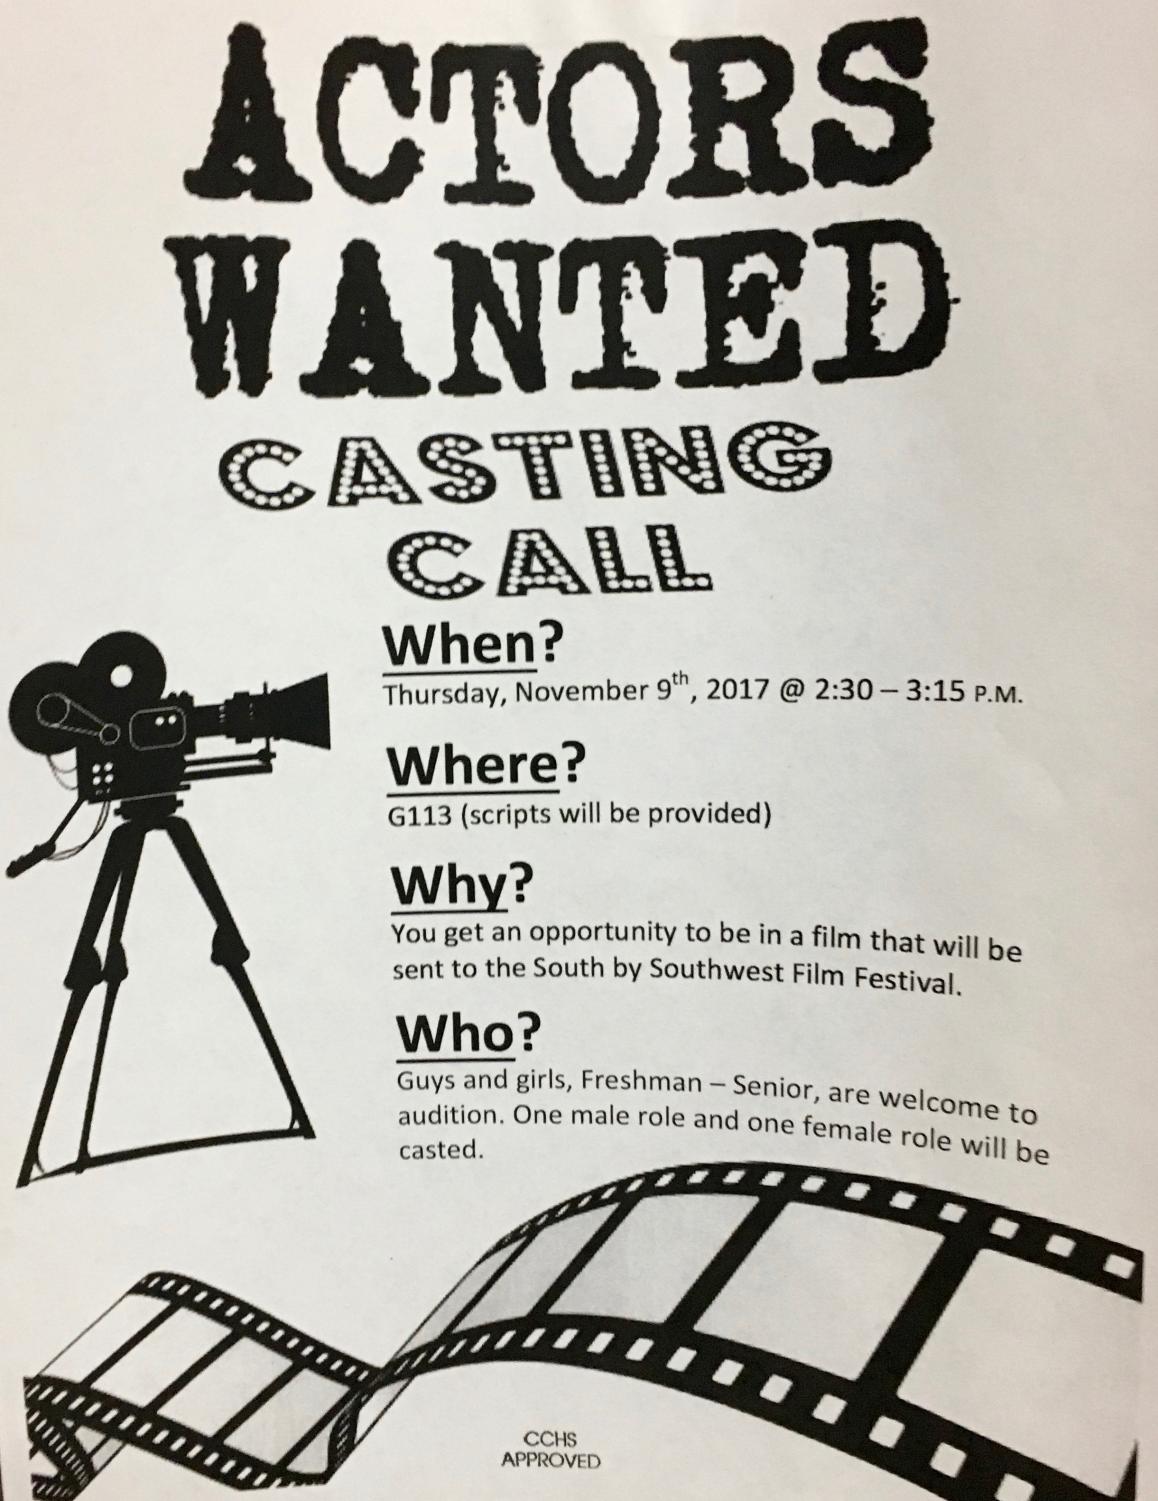 Actors Wanted:Casting Call @ CCHS Rm G113